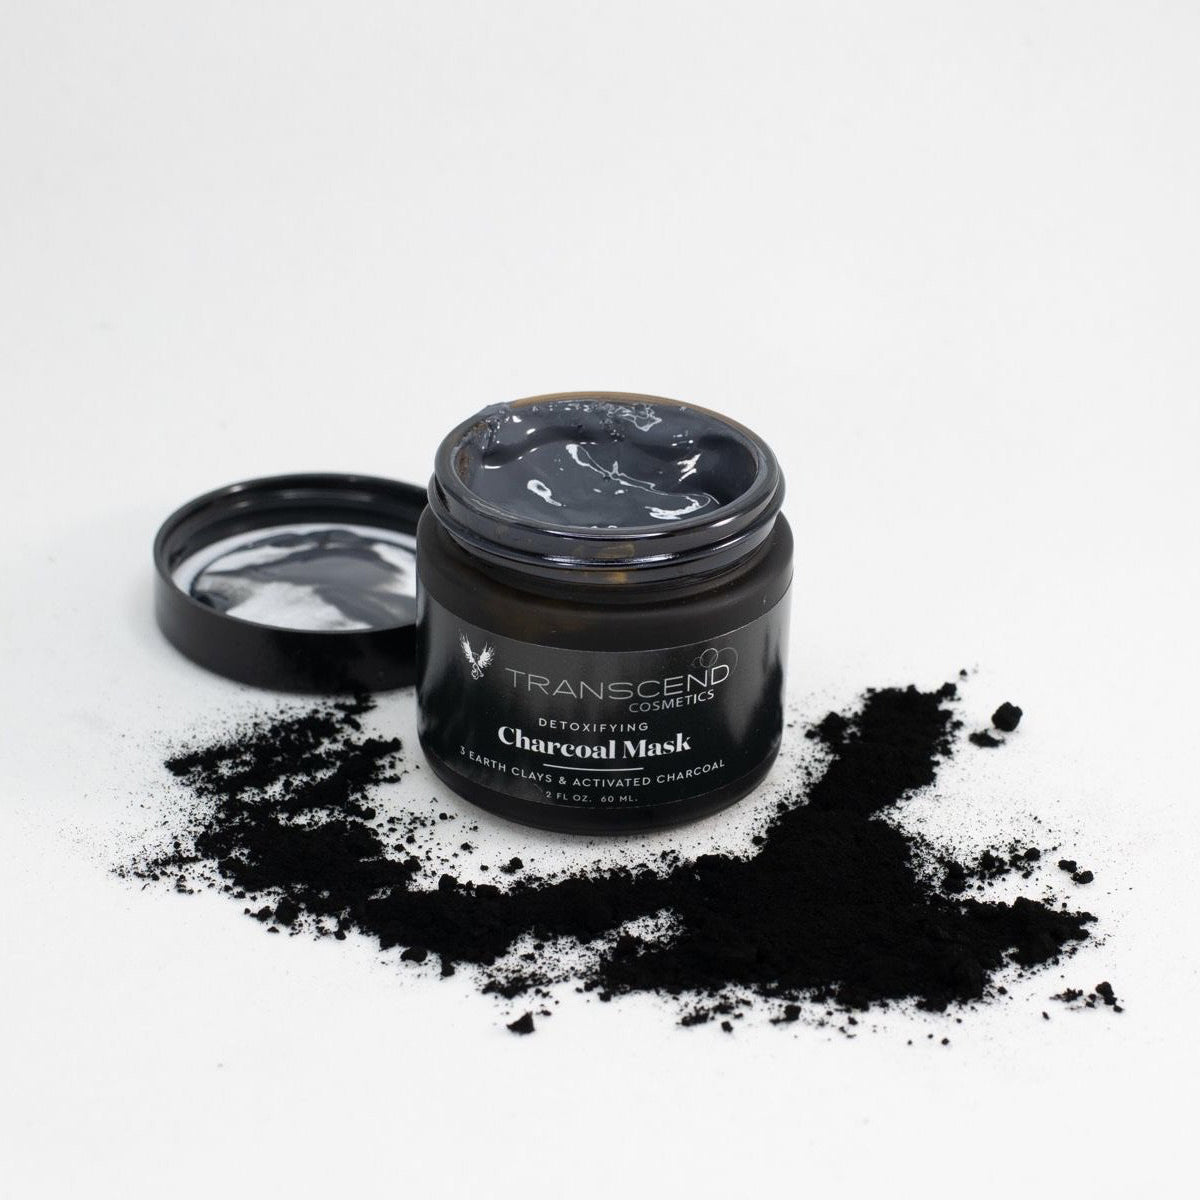 charcoal mask,charcoal peel off mask,how to apply charcoal mask,charcoal,charcoal face mask,charcoal mask review,charcoal mask for womens,charcoal peel off mask gone wrong,diy charcoal mask,black mask,activated charcoal,peel off mask,face mask,mask,charcoal peel off mask review,how to use charcoal peel of mask,charcoal masks,blackhead mask,charcoal mask in hindi,sinhala charcoal mask,blackhead removal mask,charcoal mask live demo,charcoal mask for women,activated charcoal mask